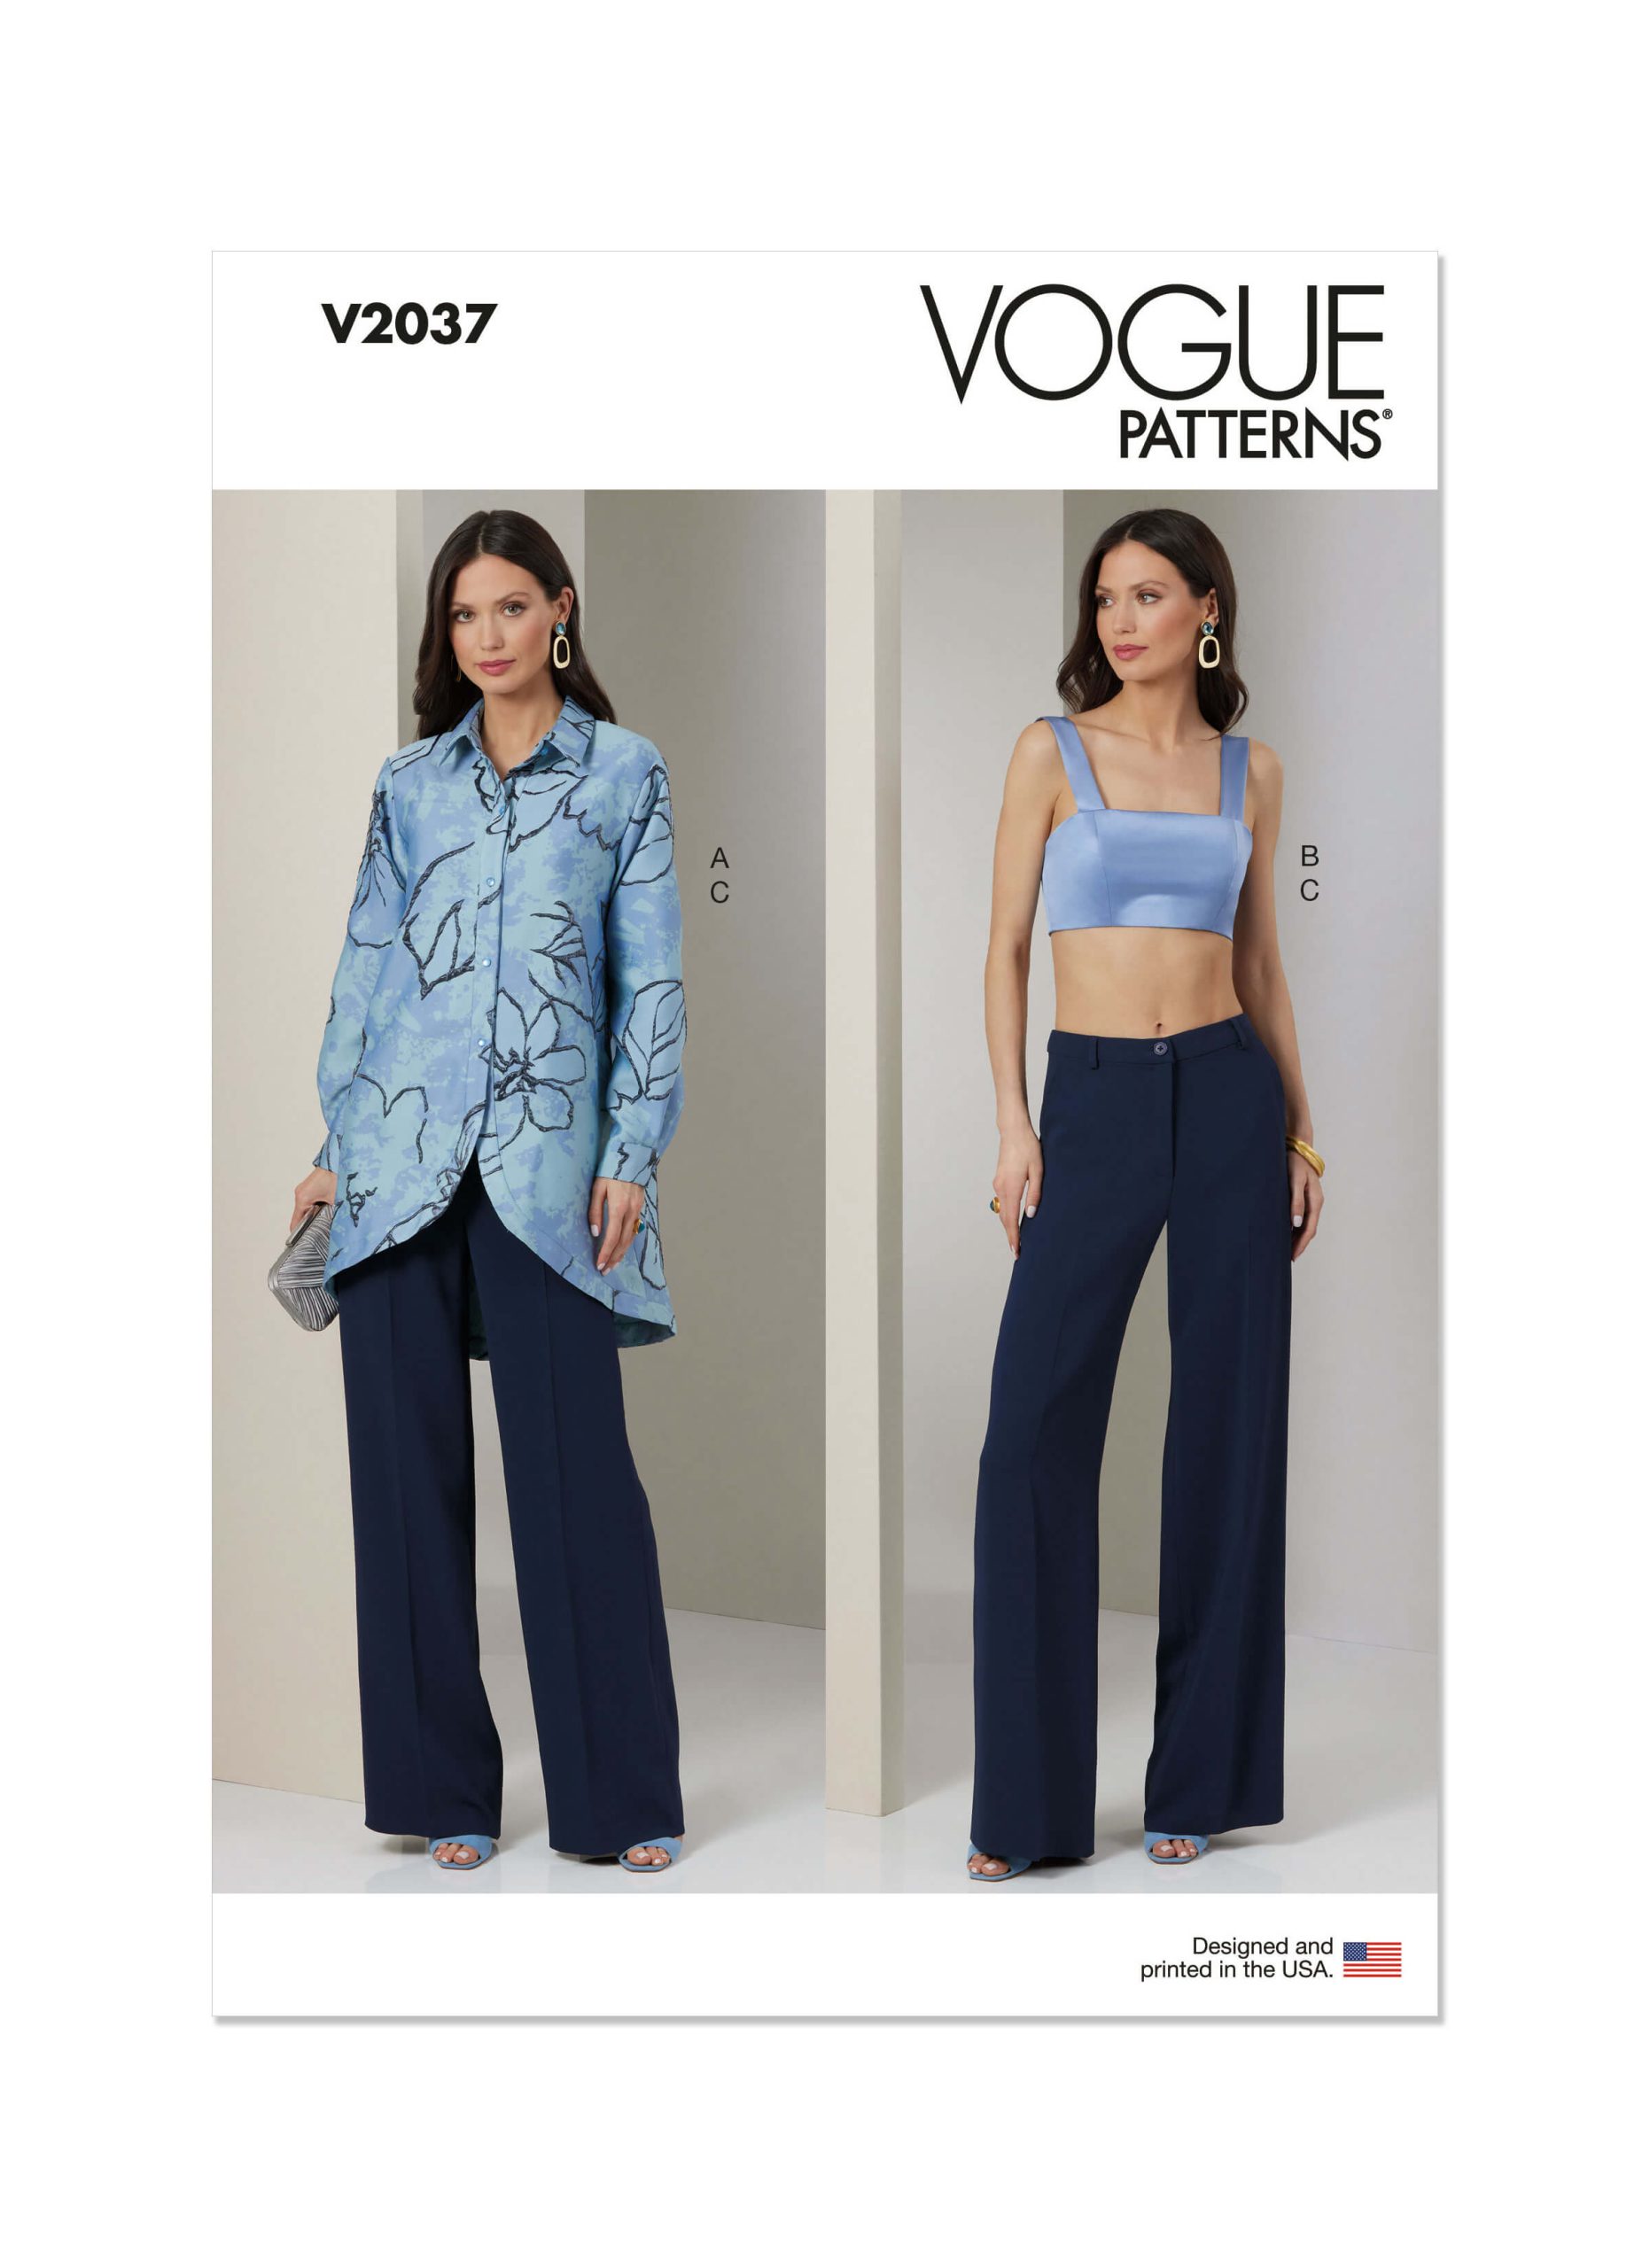 Vogue Patterns V2037 Misses' Shirt, Crop Top and Trousers